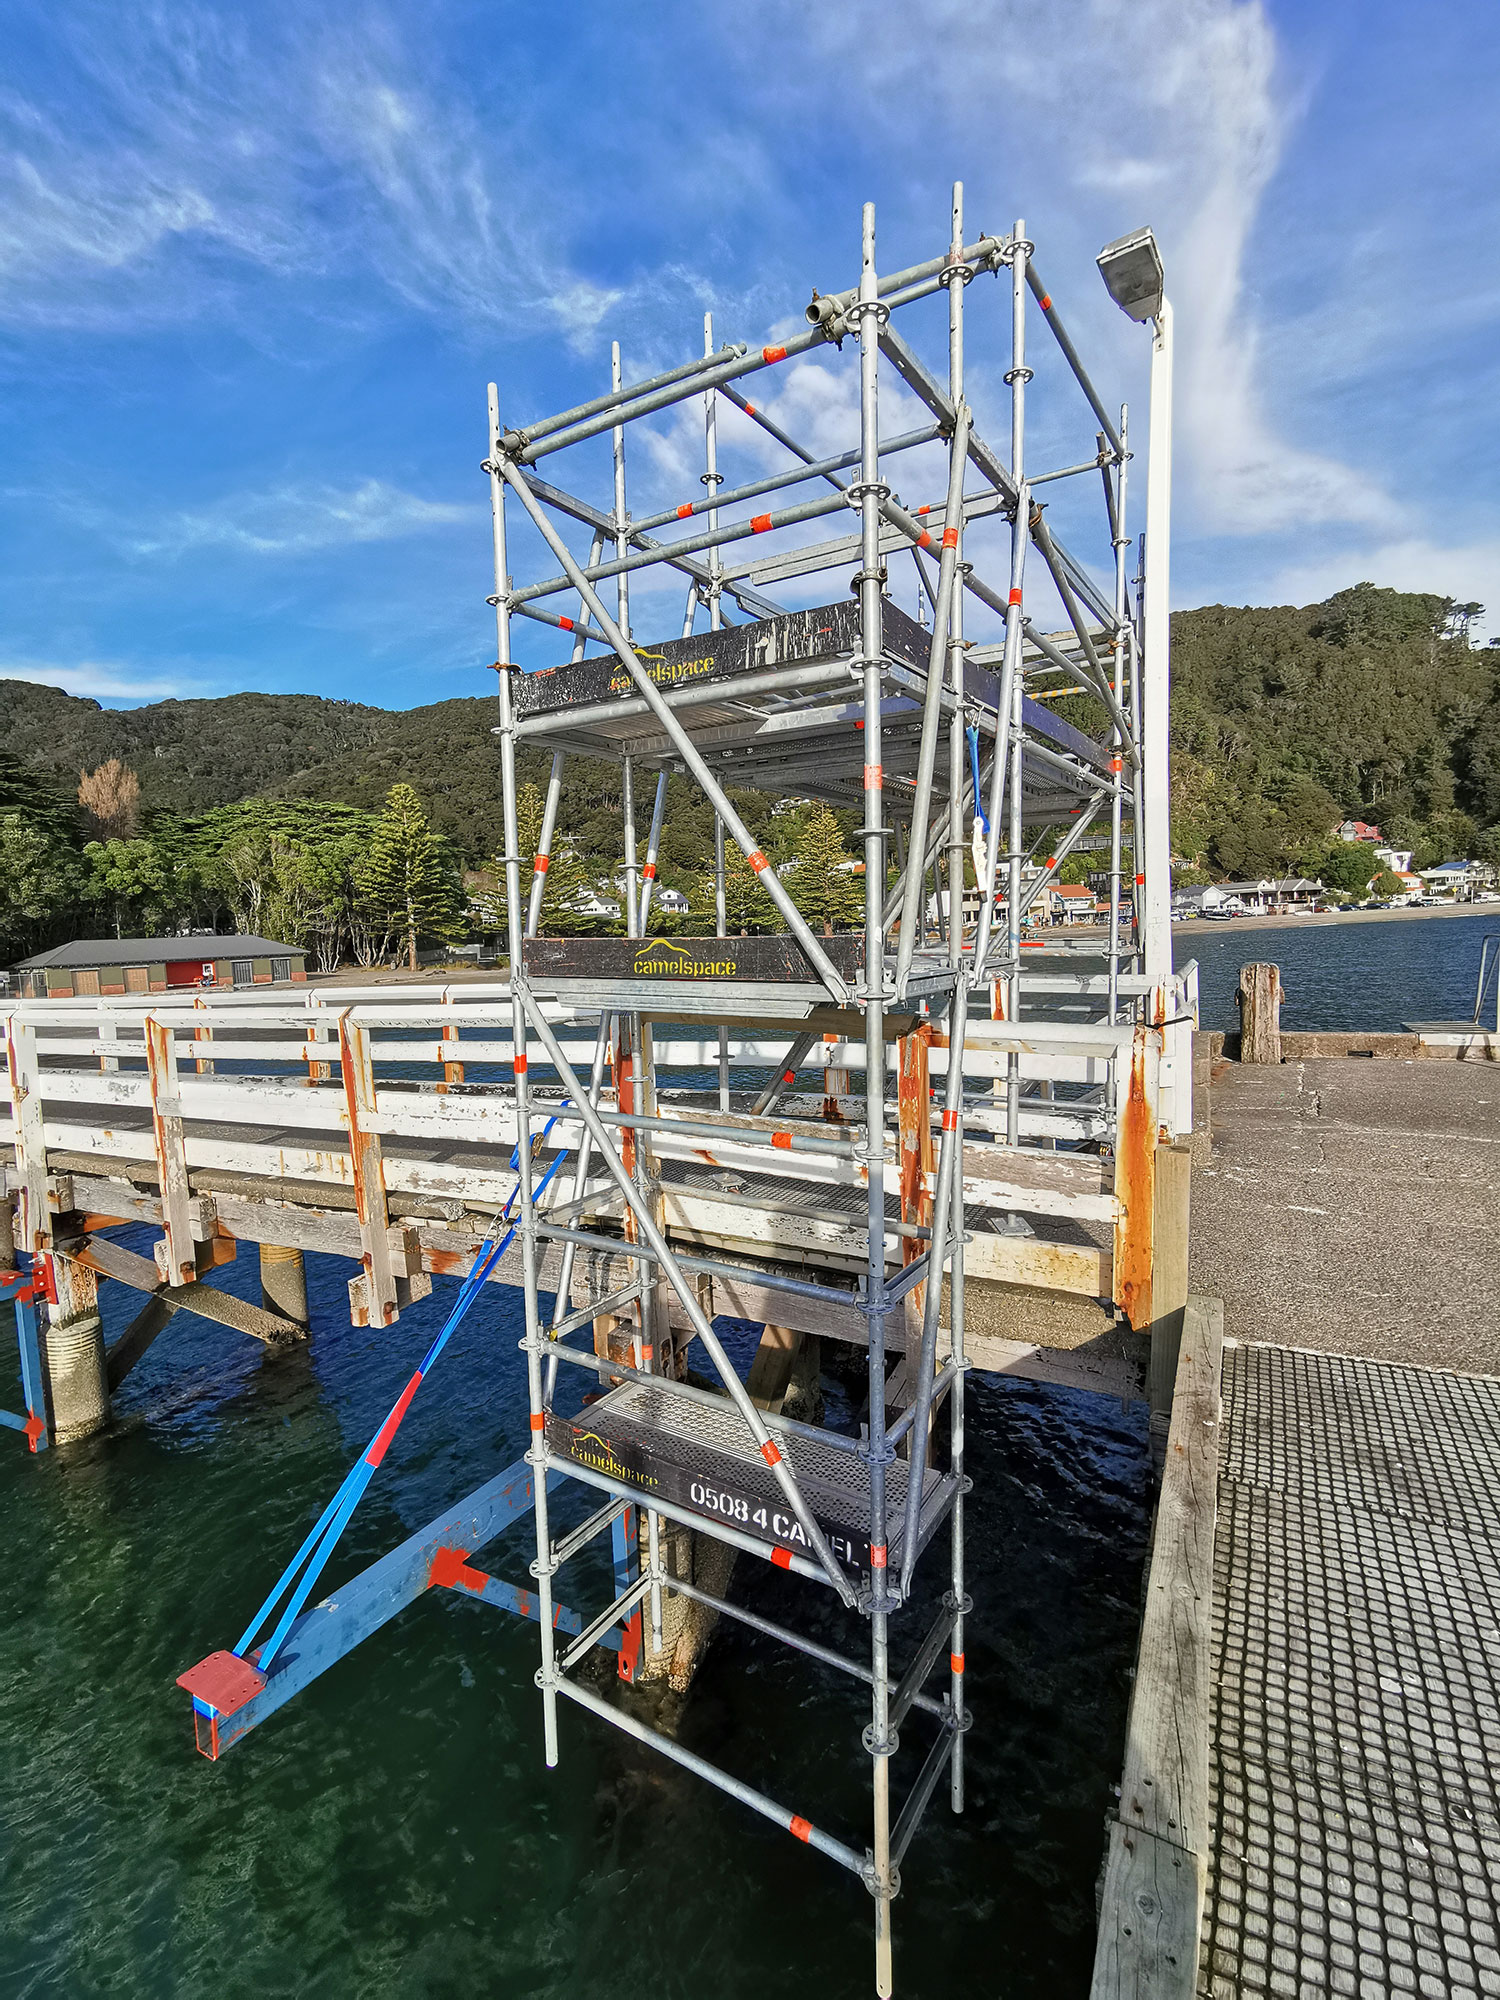 Camelspace Wellington were engaged by the HCC Engineers to help find a solution to the challenges of repairing the wharf while still in operation